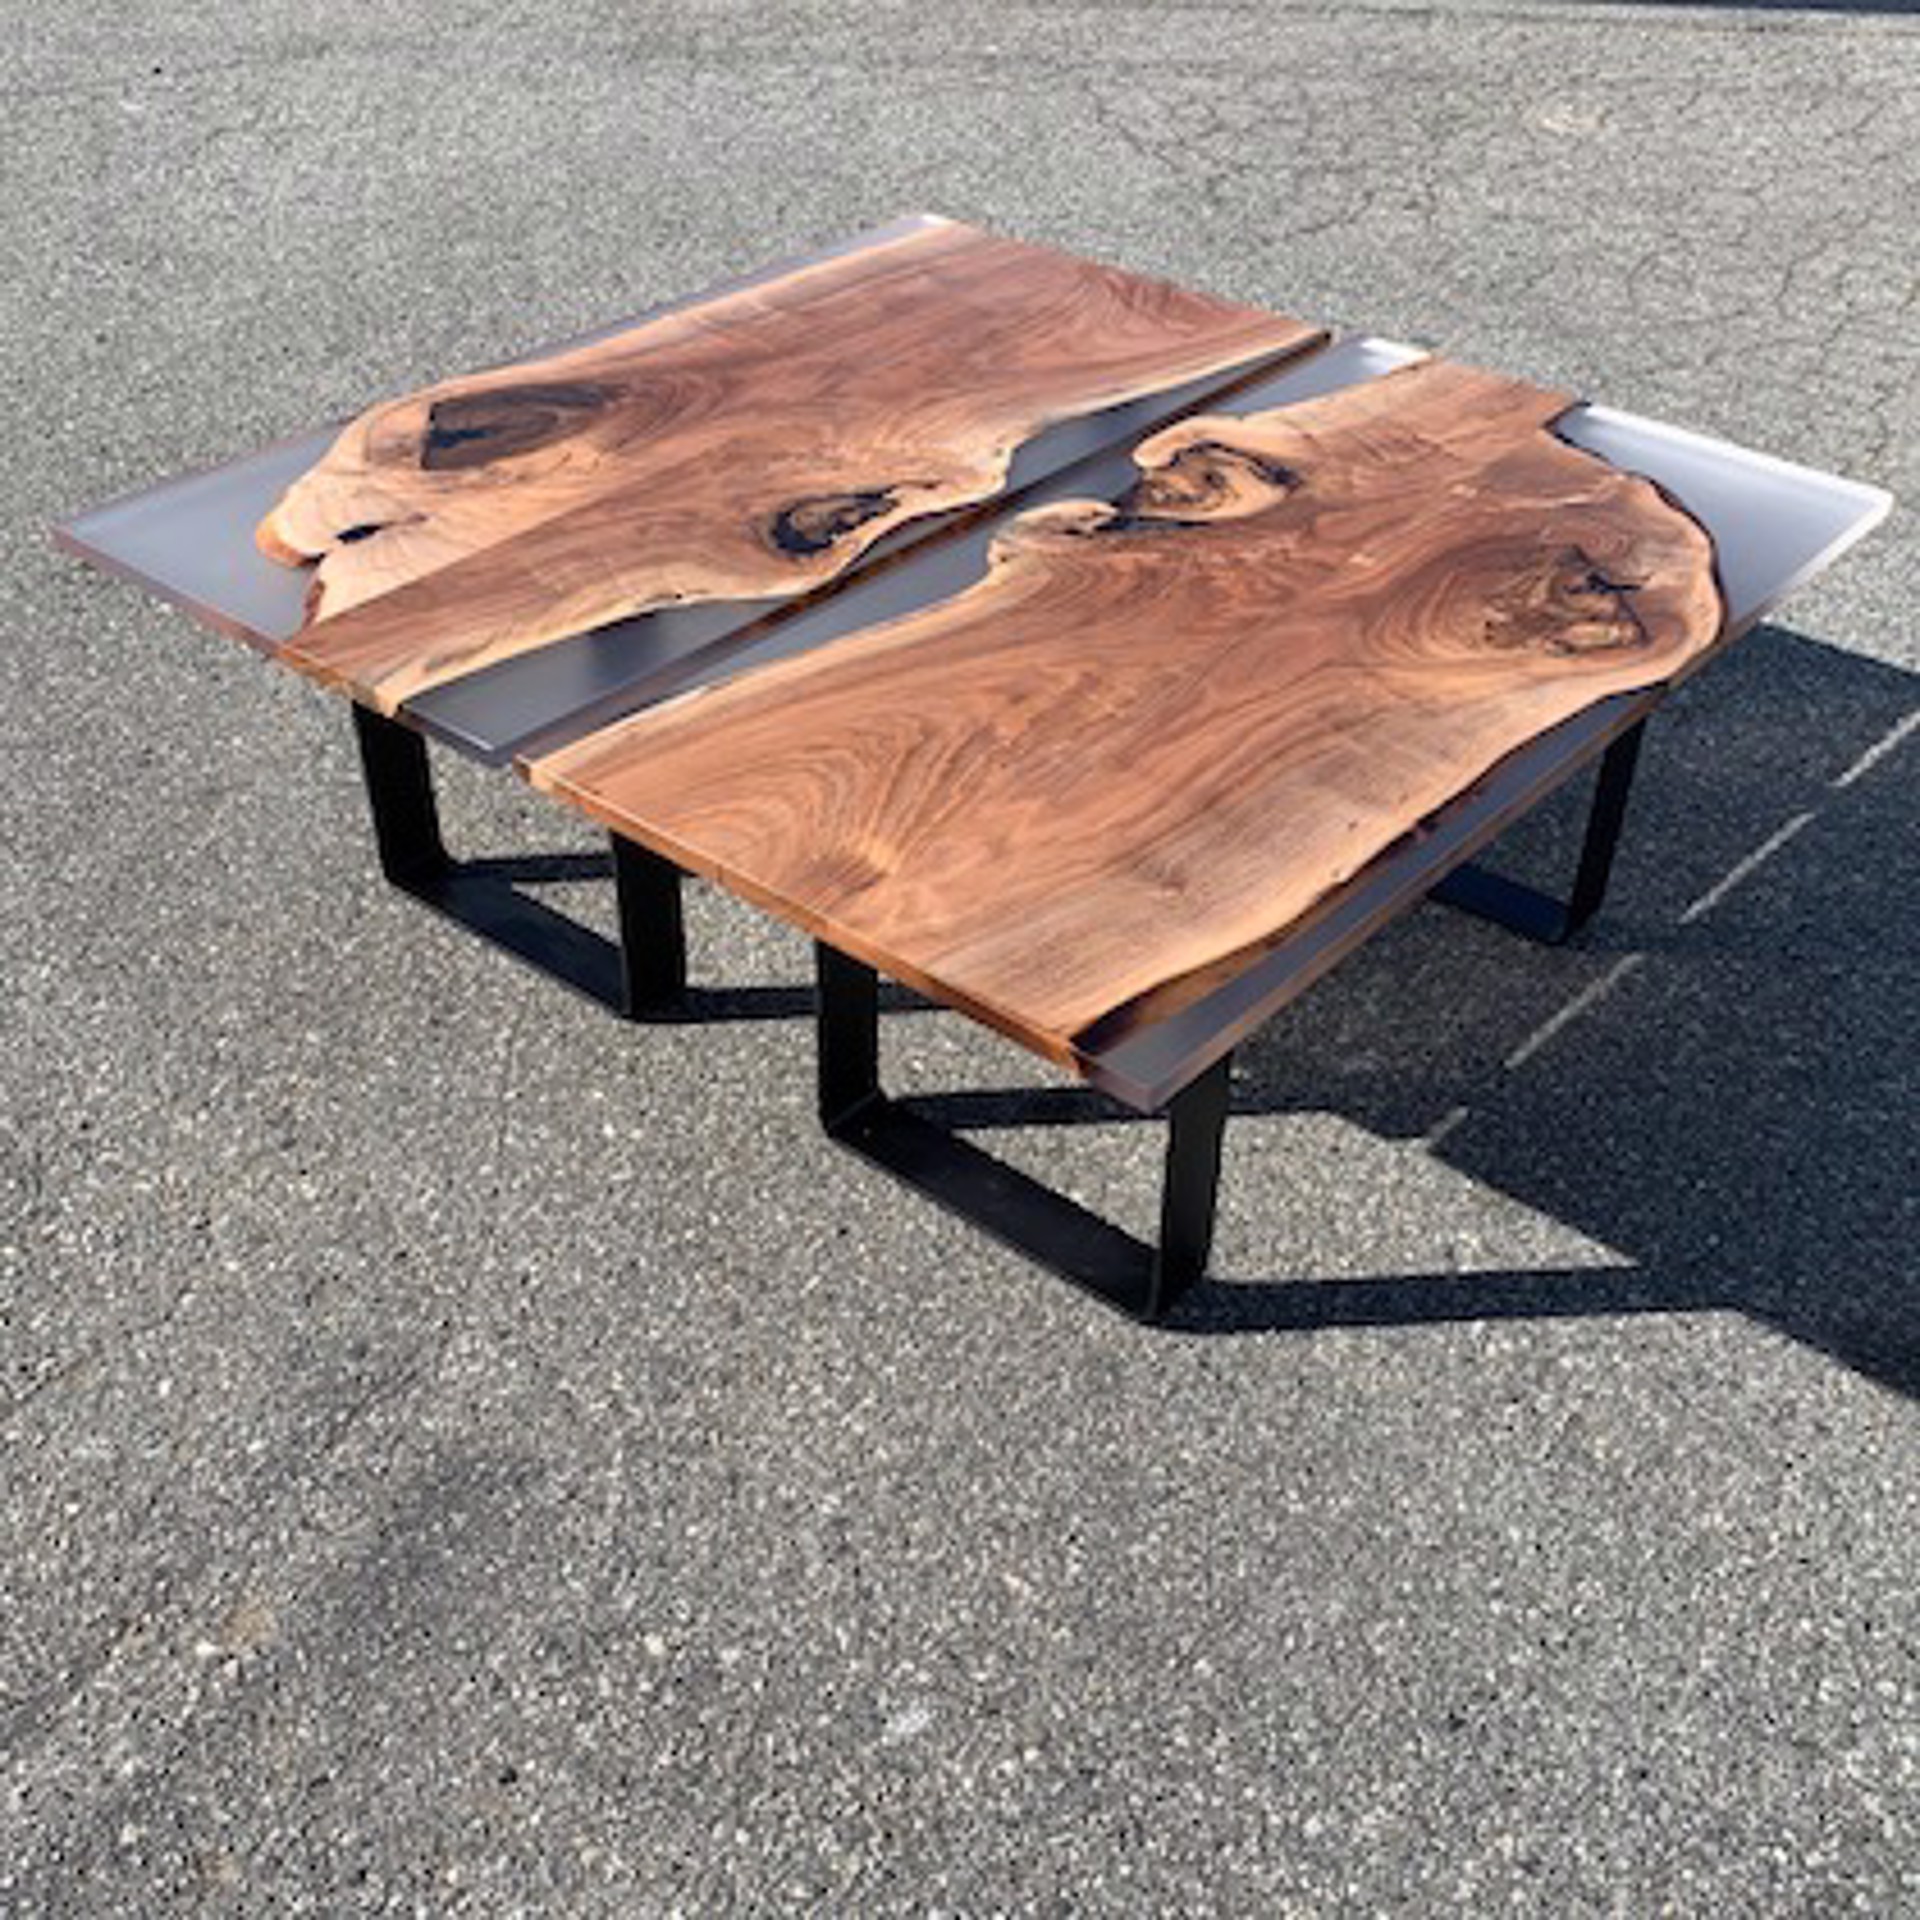 OW10171 Picazo Commission Diptych Coffee table by Benjamin McLaughlin